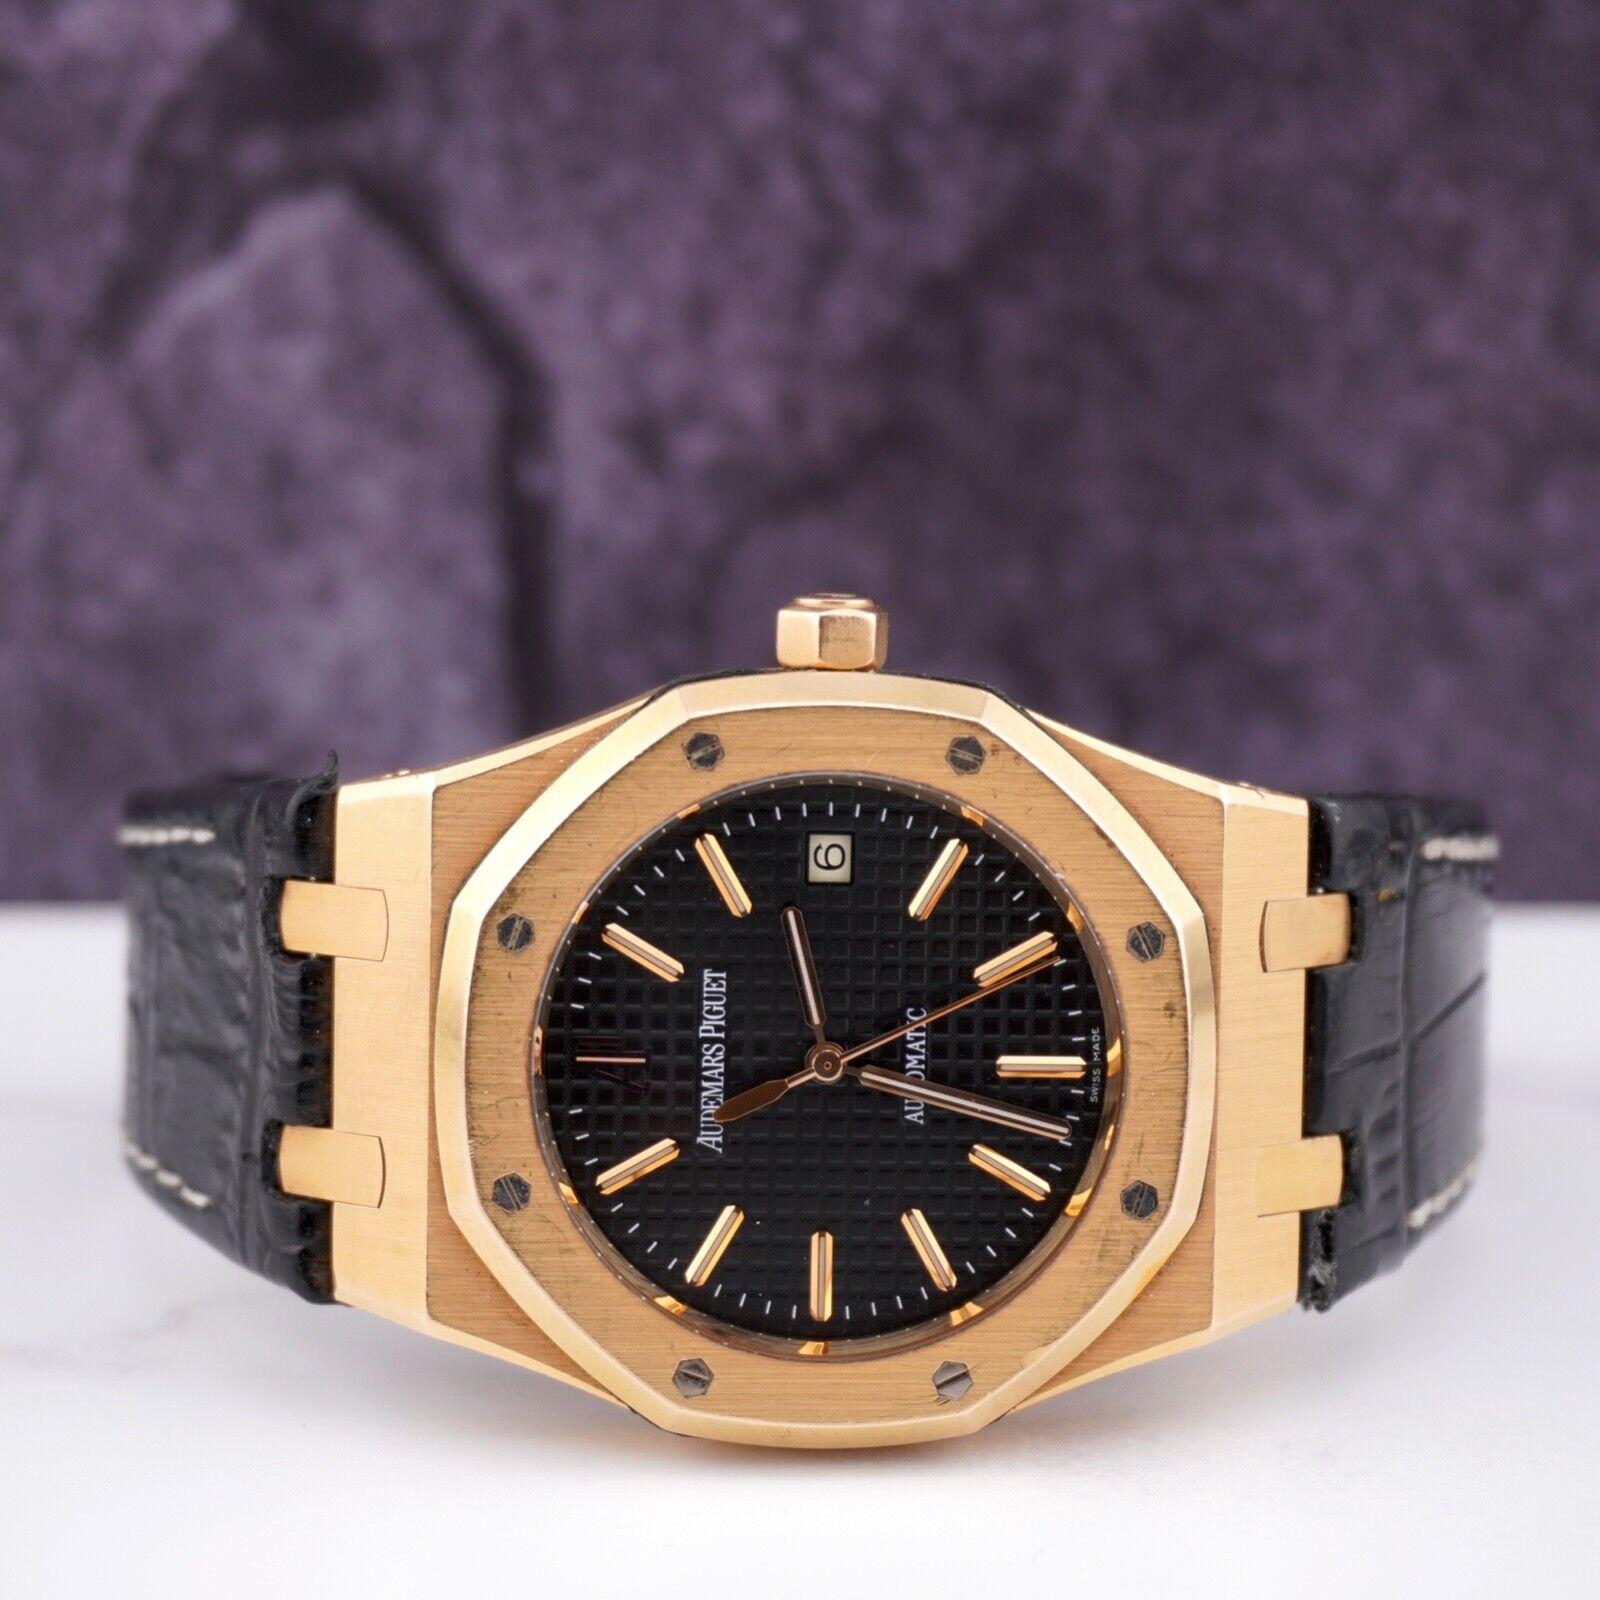 Audemars Piguet Royal Oak Jumbo 39mm Watch. A Pre-owned Watch w/ Original Box. Watch is 100% Authentic and Comes with Authenticity Card. Watch Reference is 15300OR and is in Great Condition (See Pictures). The dial color Black and material is 18k